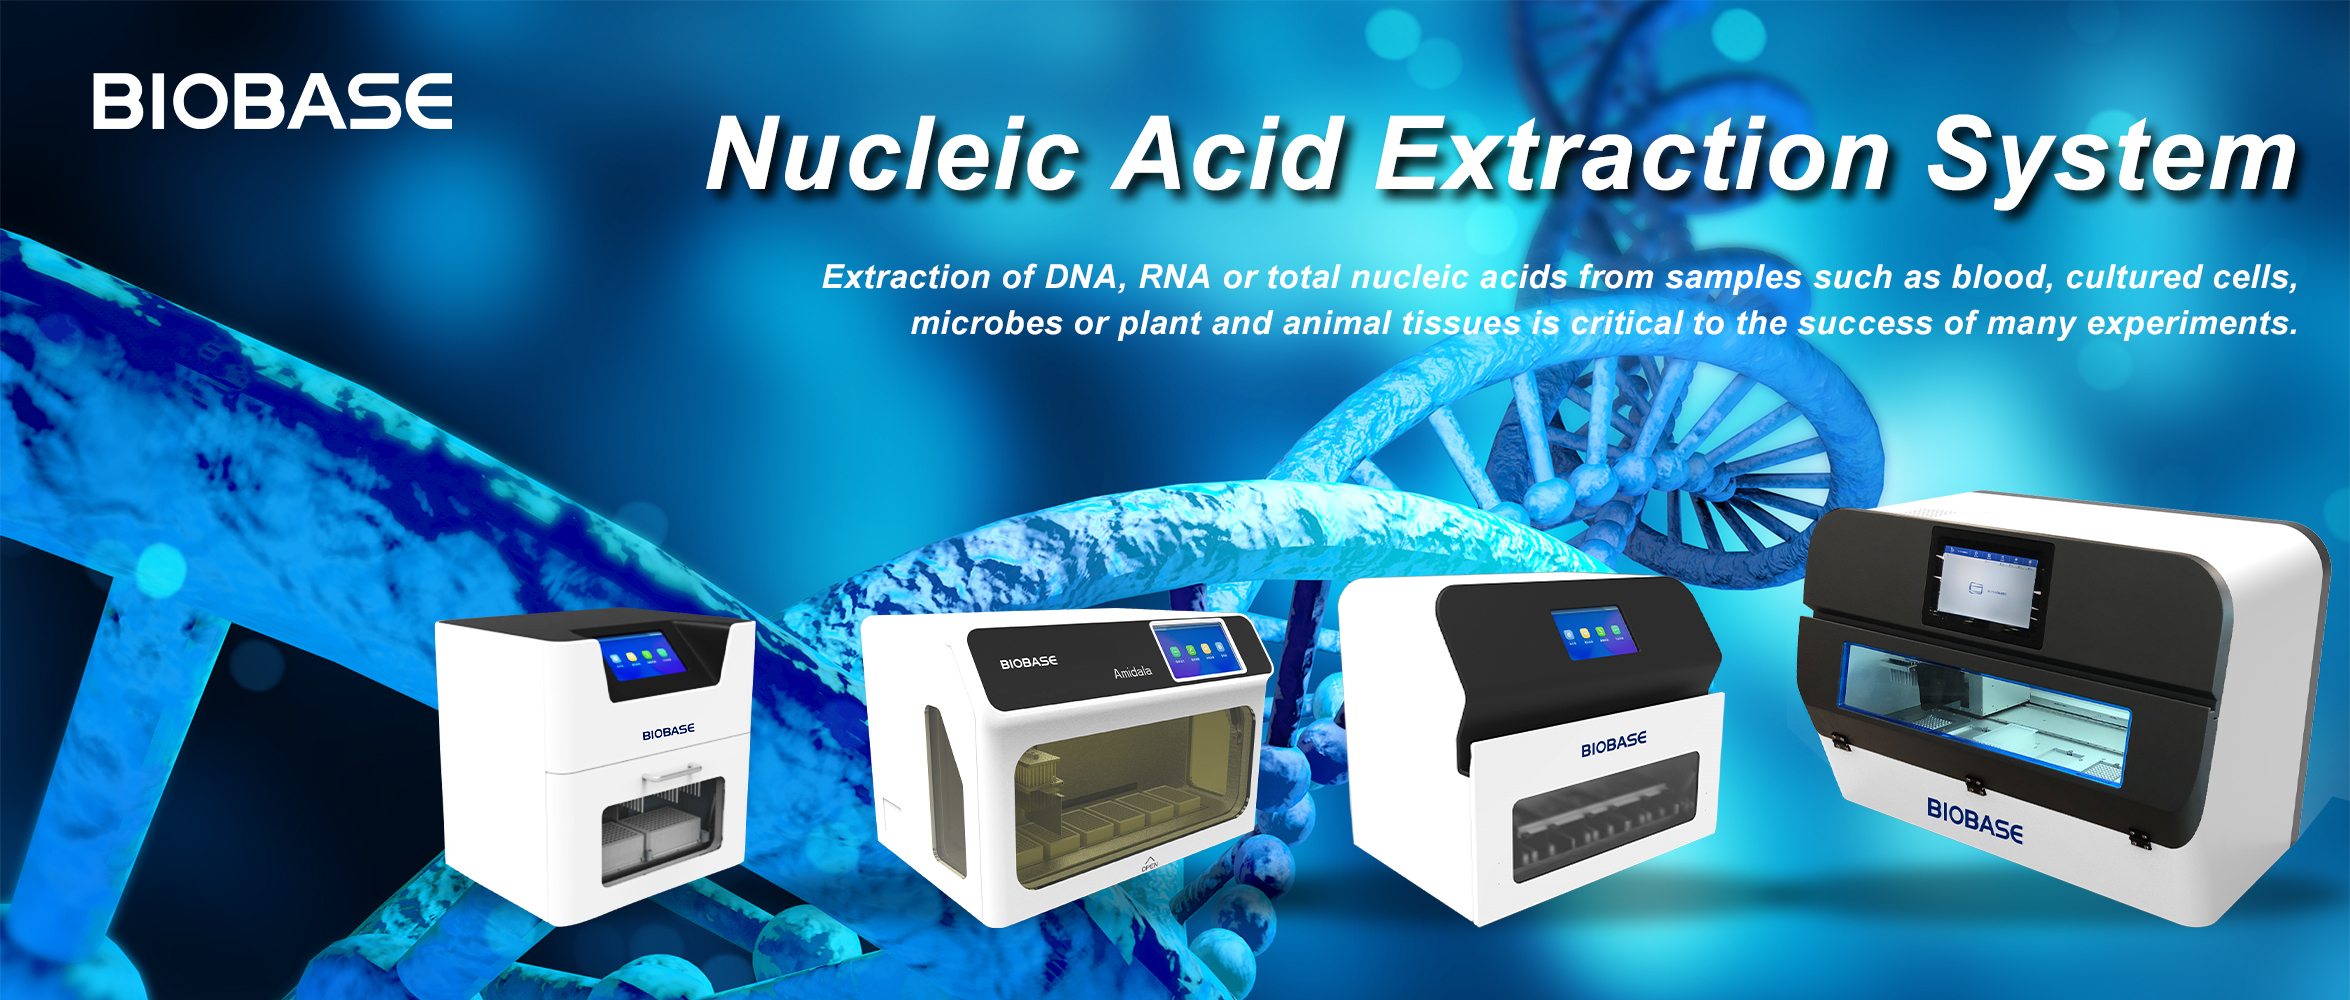 Nucleic Acid Extraction System And Purification Market Size, PART1